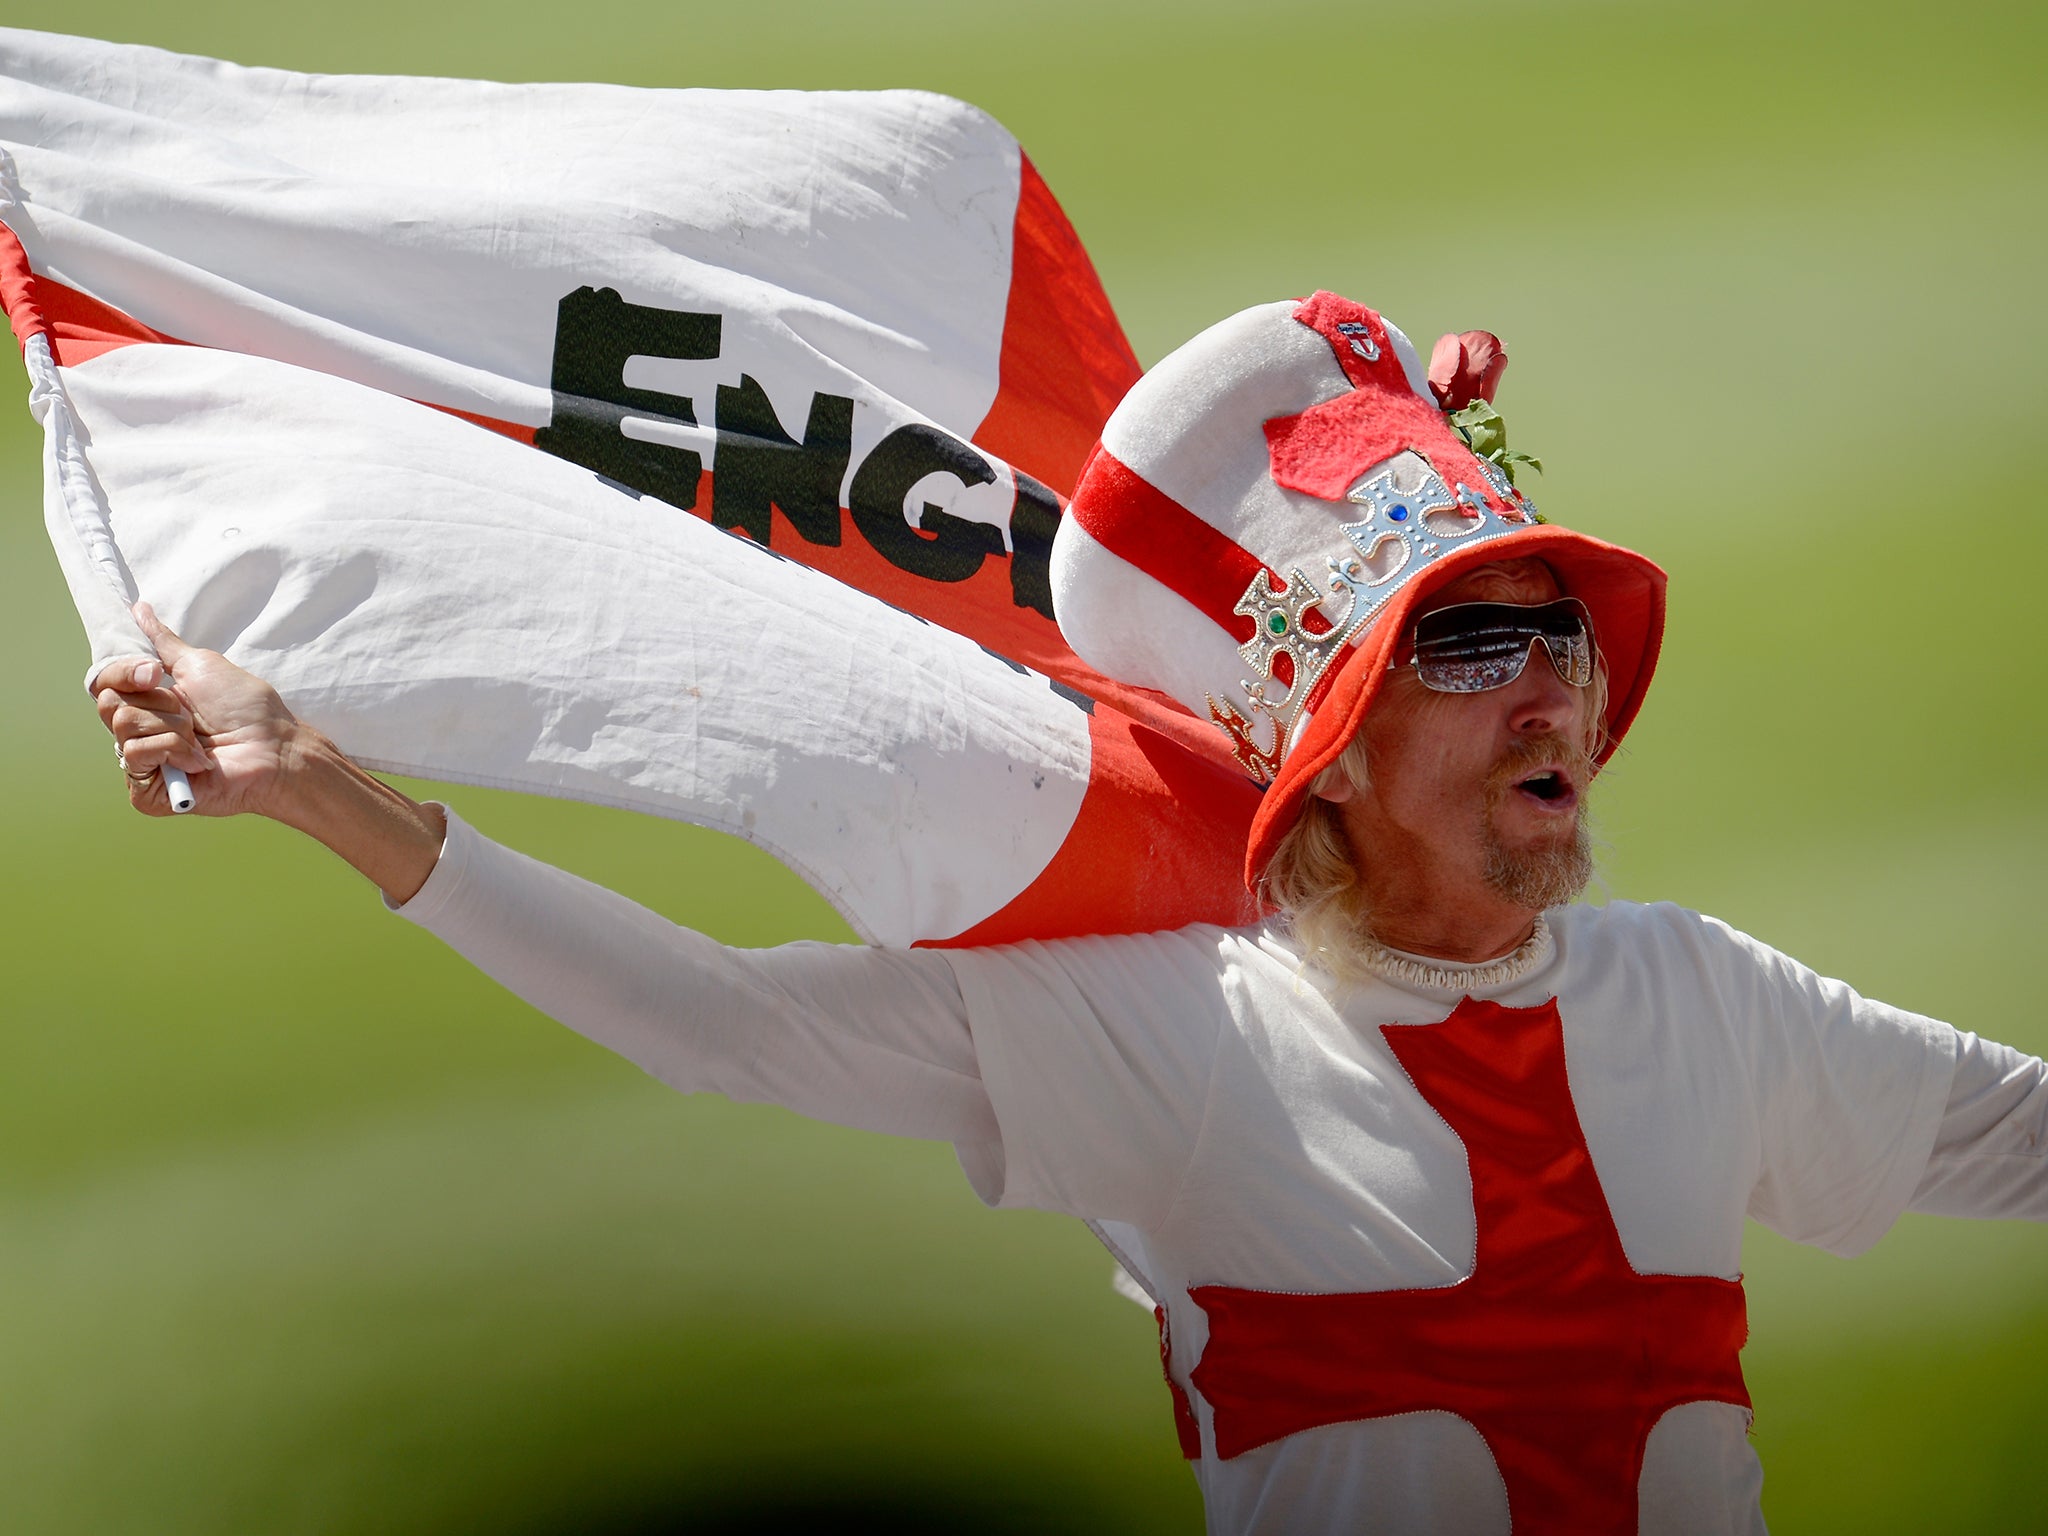 "There is only one thing better than being an Englishman who is into cricket when England are doing well in the Ashes. That “thing” is to have an Australian around to give some stick to."